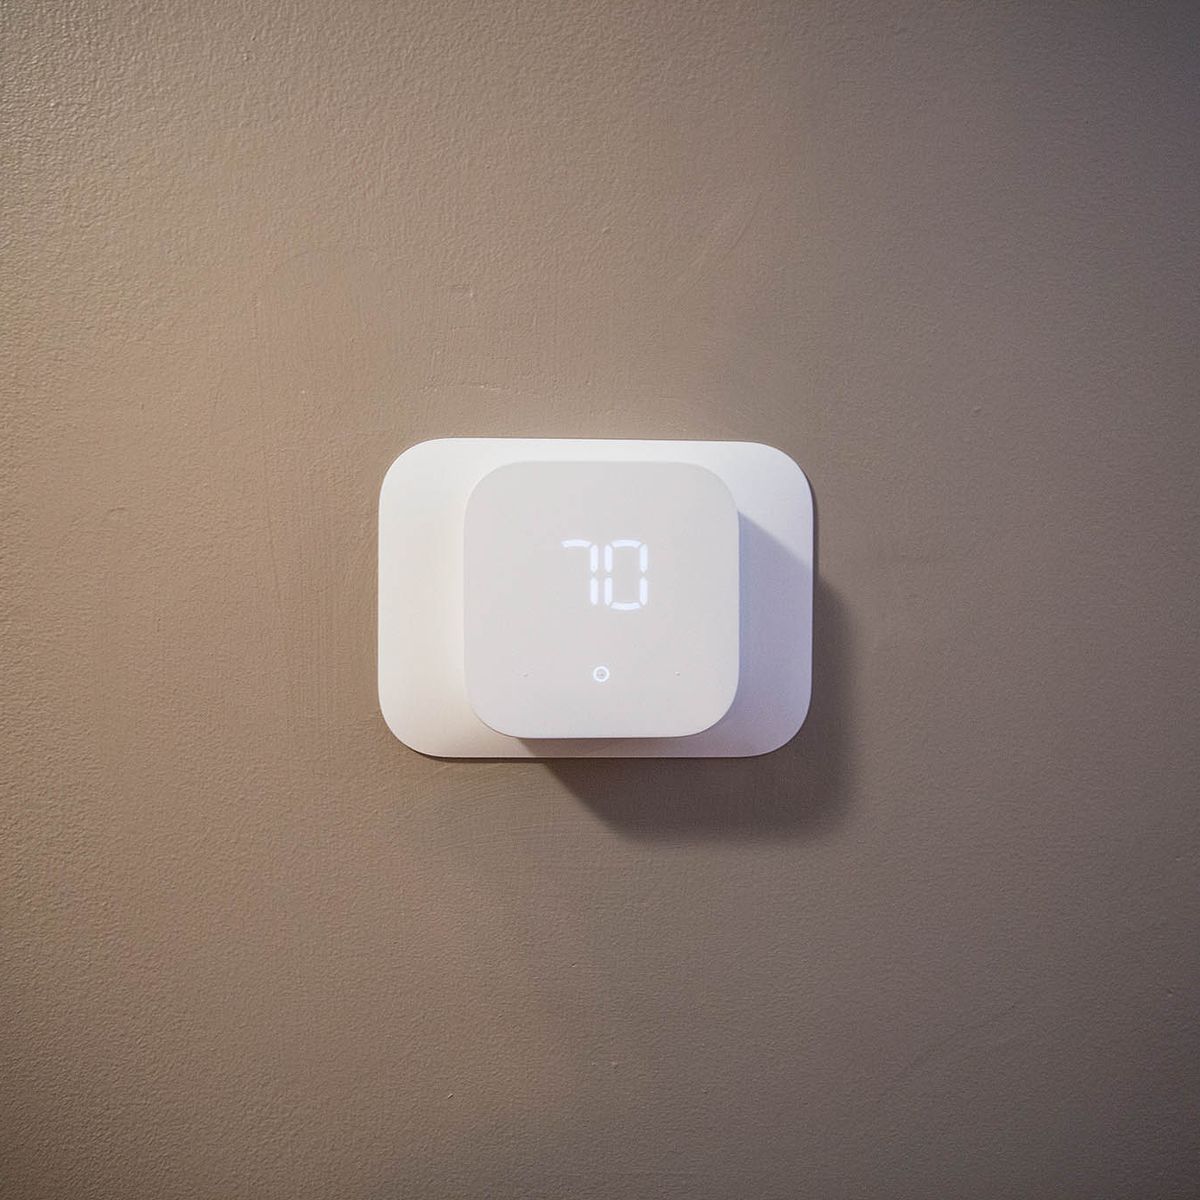 Amazon’s stunner of a wise thermostat is on sale for its absolute best value thus far